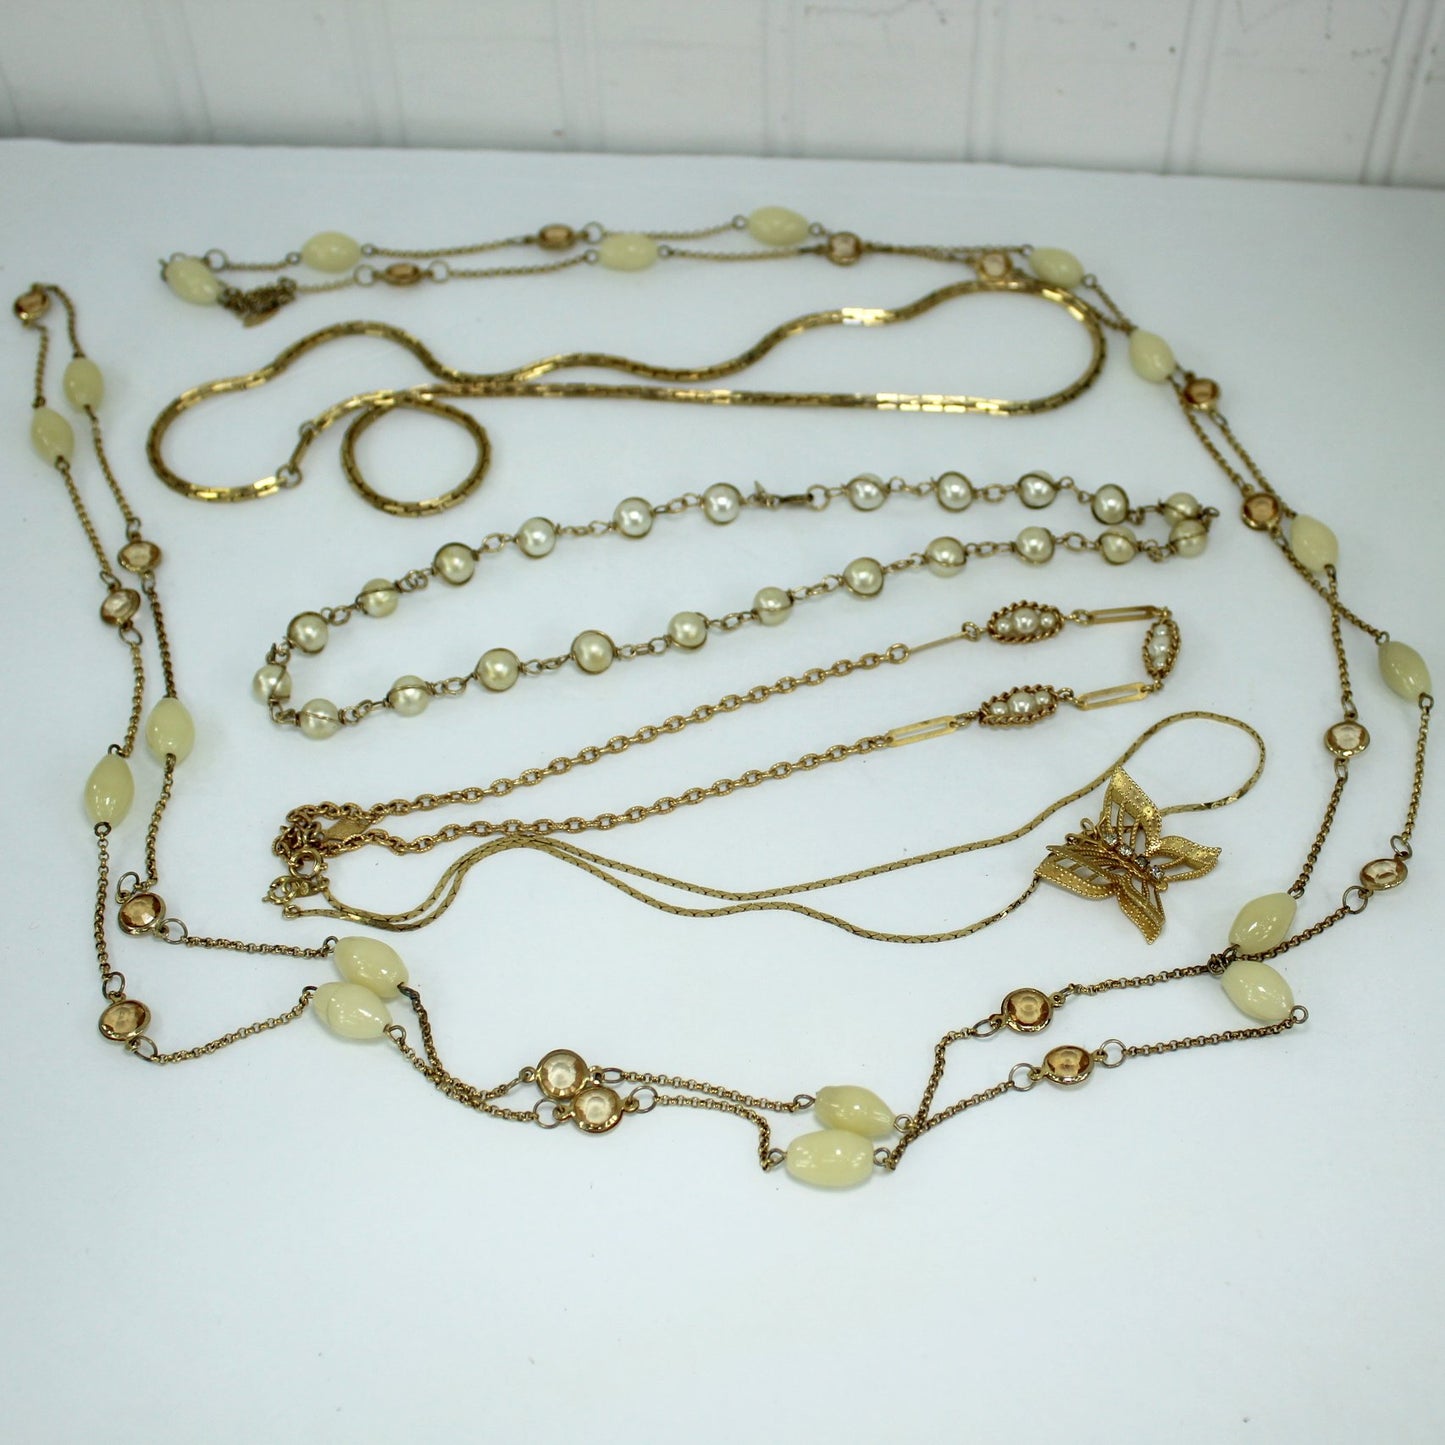 Lot Collection 25 Vintage Designer Signed Jewelry Necklaces Bracelets Pins Earrings necklaces on table closeup